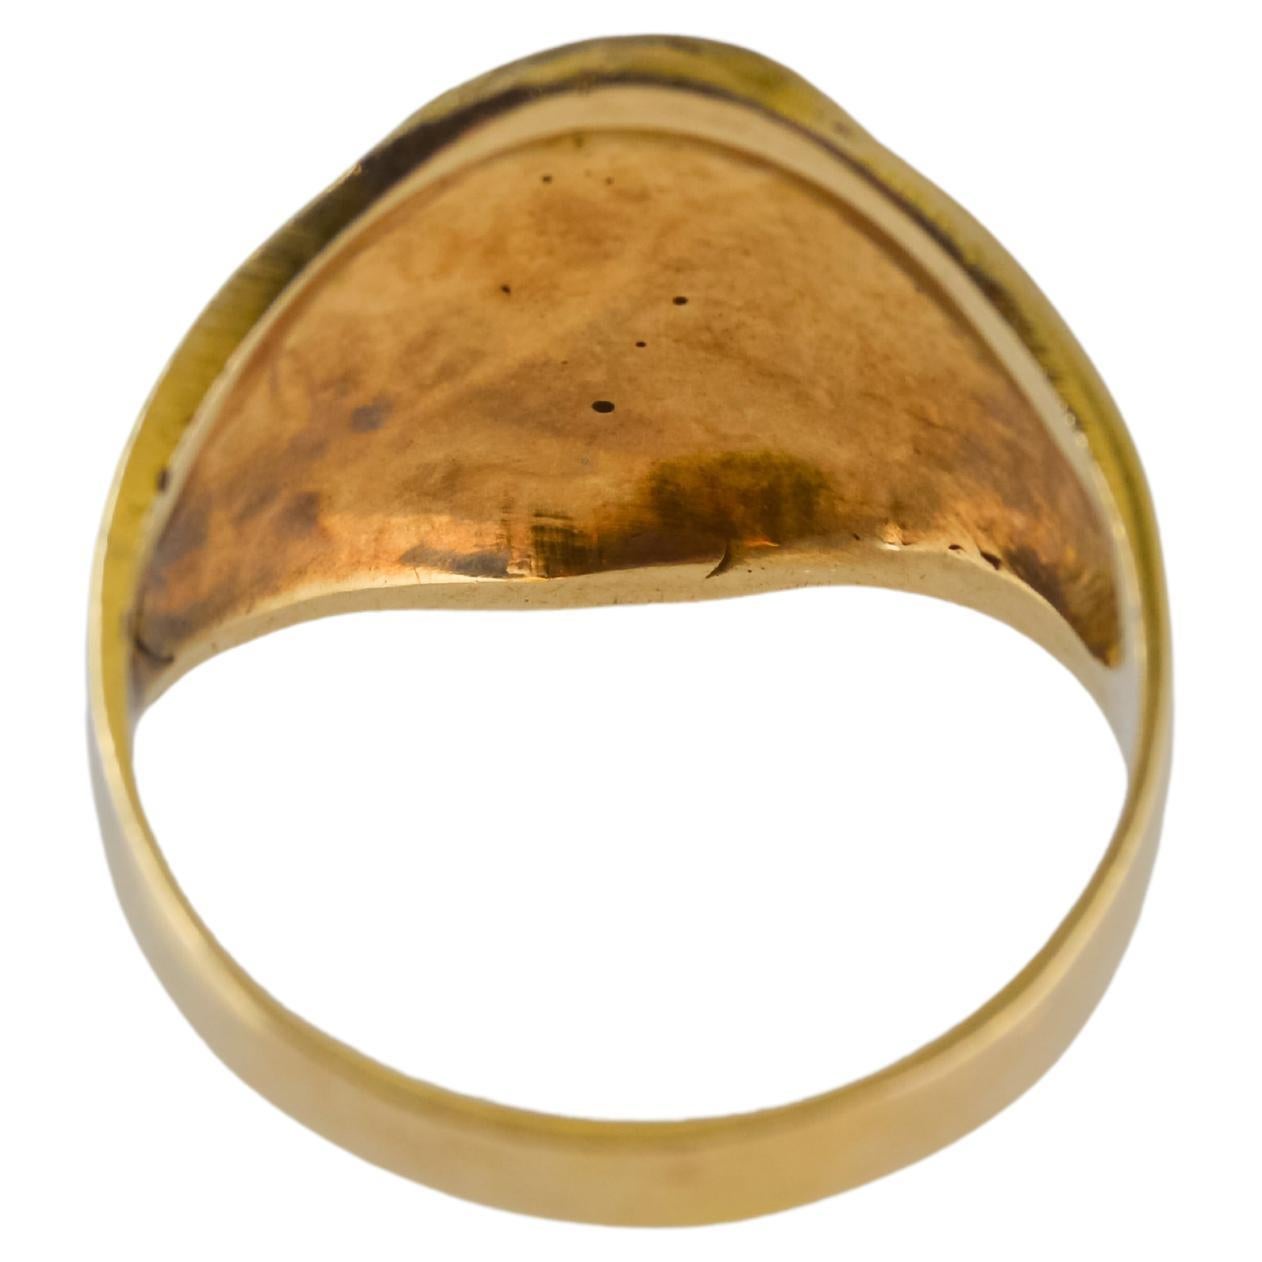 Women's or Men's Art Deco 10 Karat Yellow Gold Signet Ring Sized to 6 1/2, 1930s, Hand Made For Sale